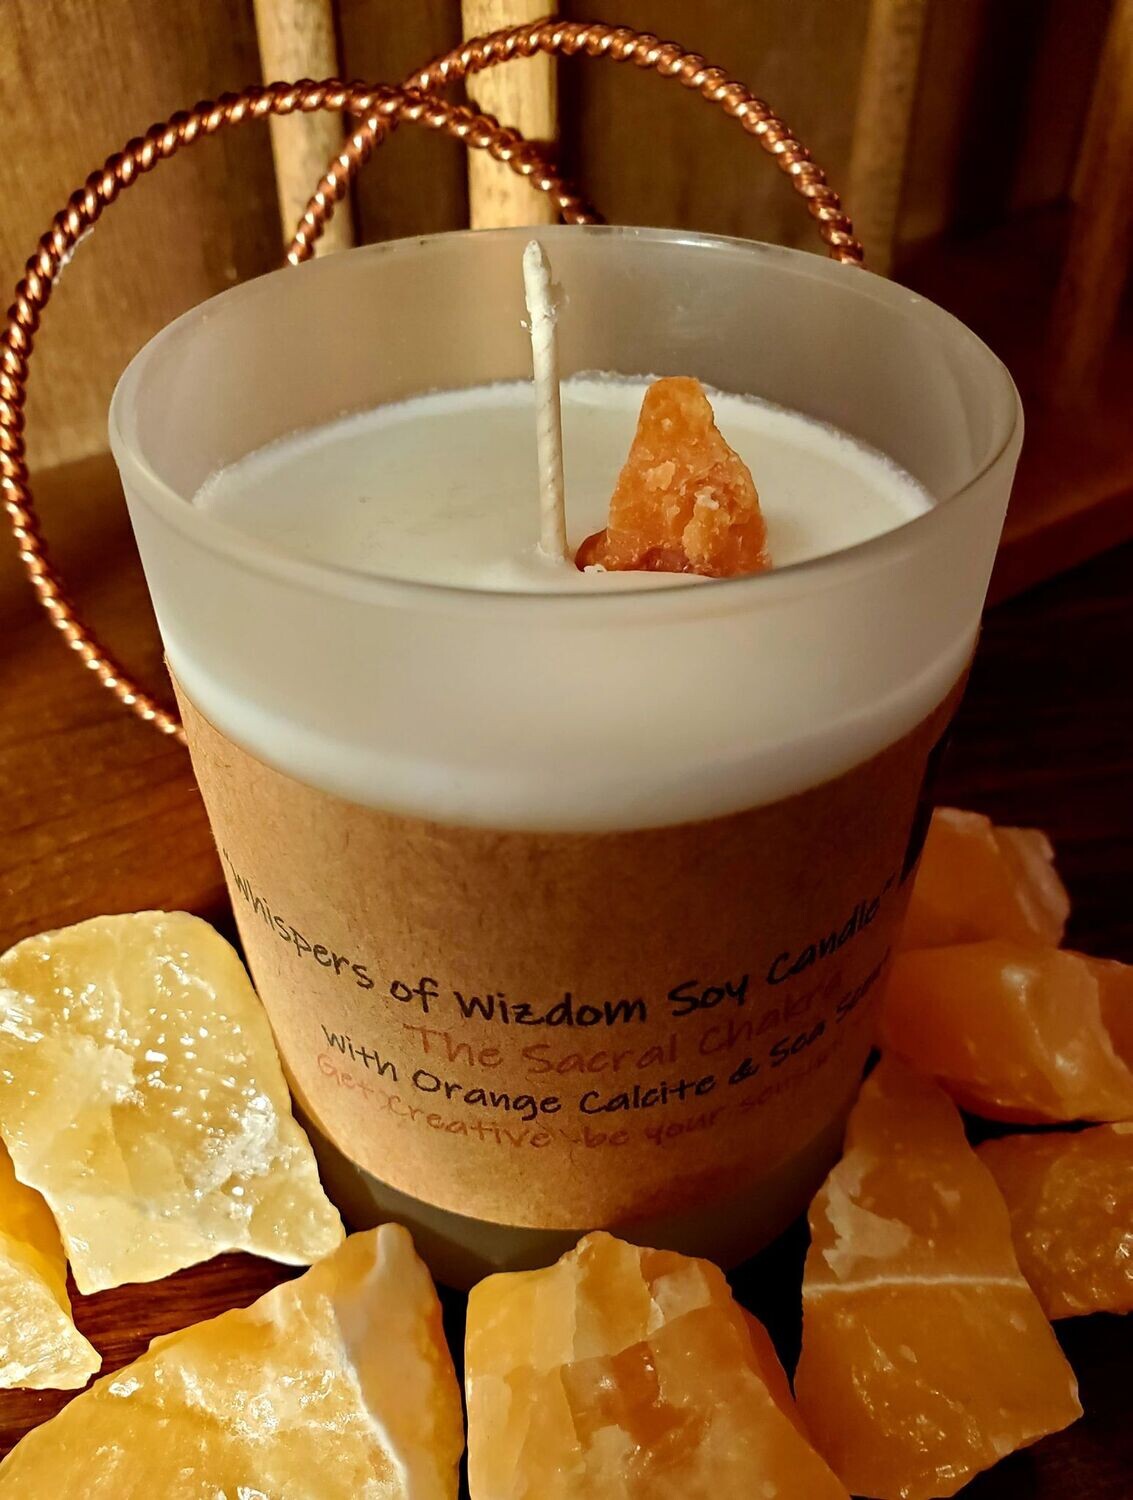 Judy's Soy Candle -Sacral Chakra / Floral/Sea Scent with Orange Calcite